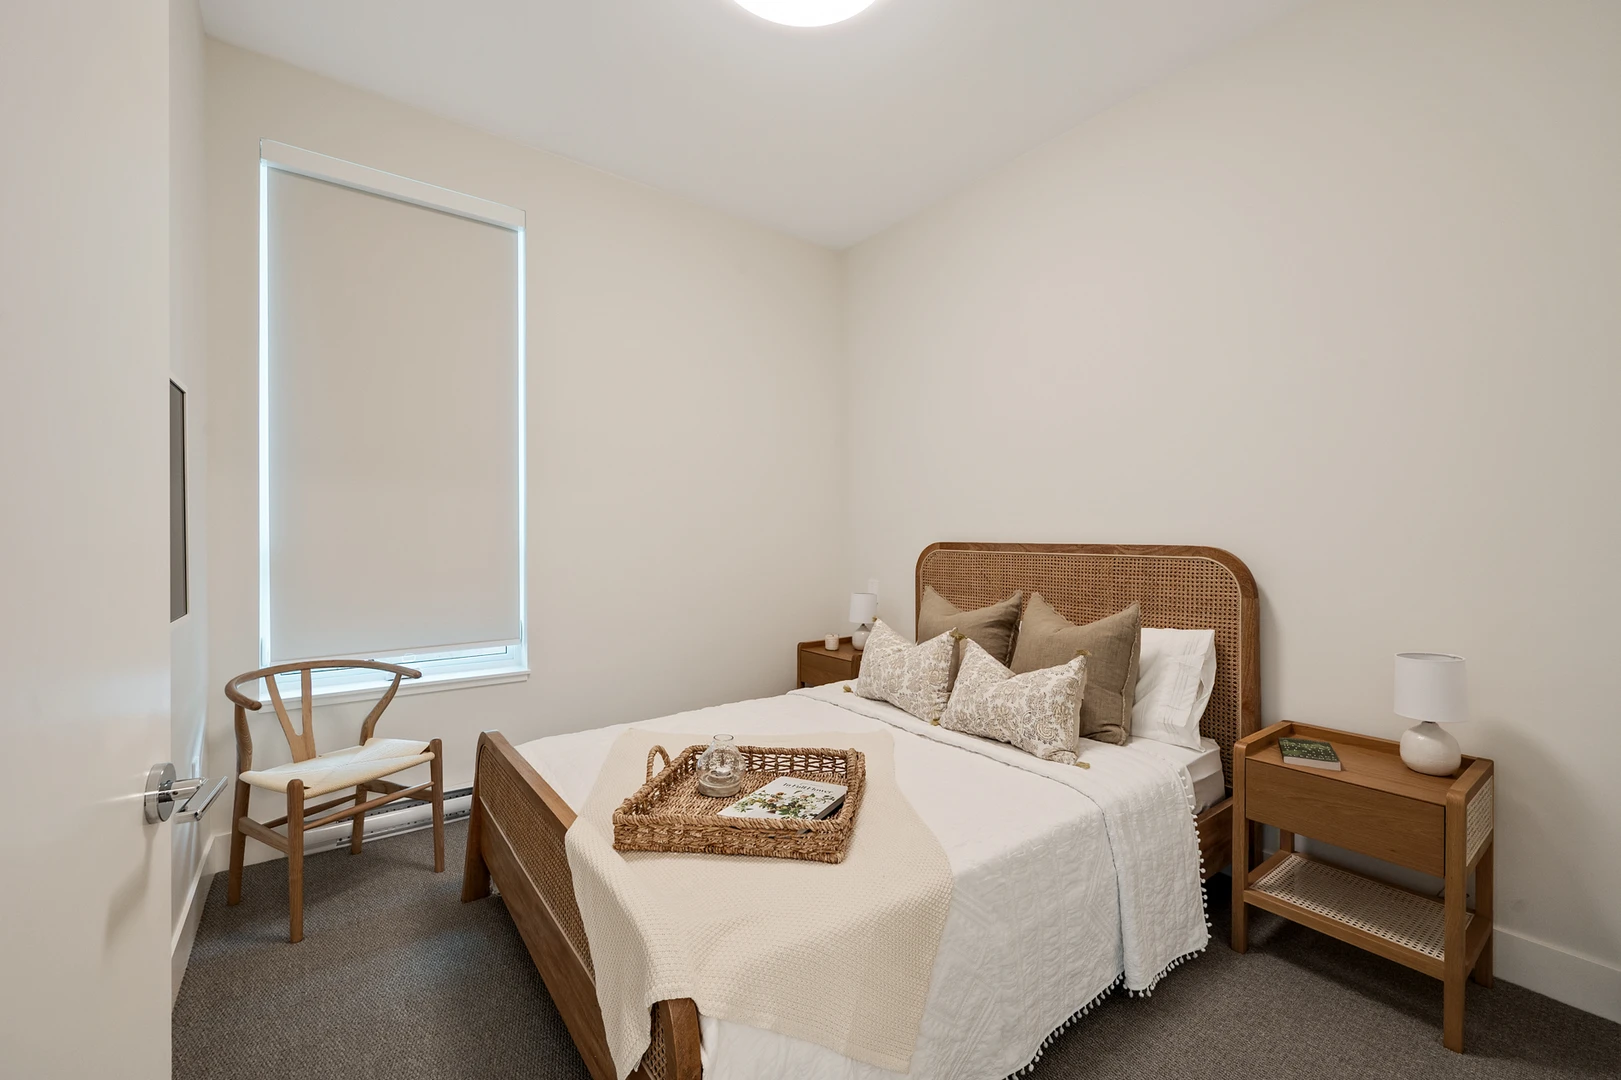 Affordable room for students with ample lighting in 